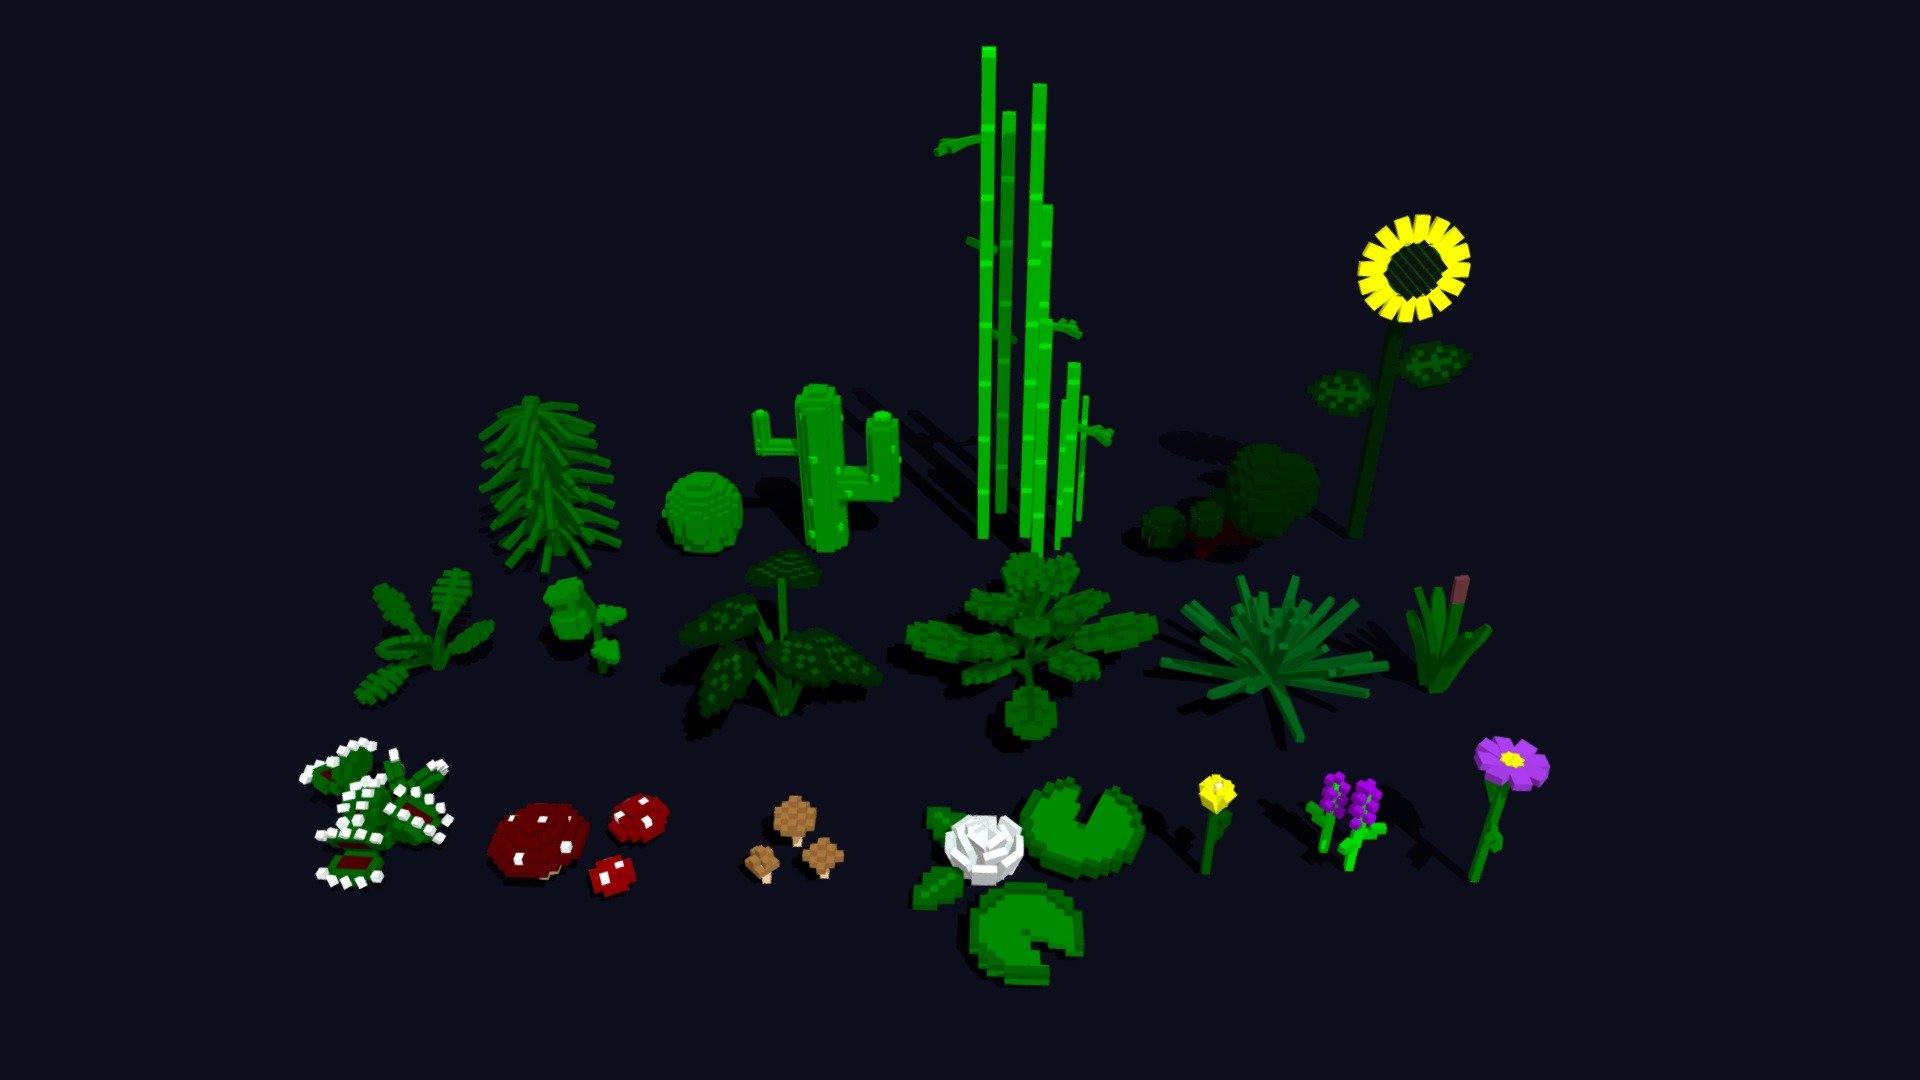 Plants Pack made in voxel style !

Contains 50 items and will get updated with more items !

Low Poly Stylized plant for your game.

All Plants that are on Plants Collection will include on that pack !

NOW from $30 to $20

---------------------------------------------------------- Content : ----------------------------------------------------------

50 Models




Plants 

Flowers 

Bamboo 

Mushrooms 

Carnivorous Plant 

Cactus 

Water Lilies

etc

*Flowers comes in many color variations like




Red

White

Orange

Pink

Blue

etc

By MrMustache - Plants Pack - 3D Voxel Low Poly Models - Buy Royalty Free 3D model by MrMGames 3d model